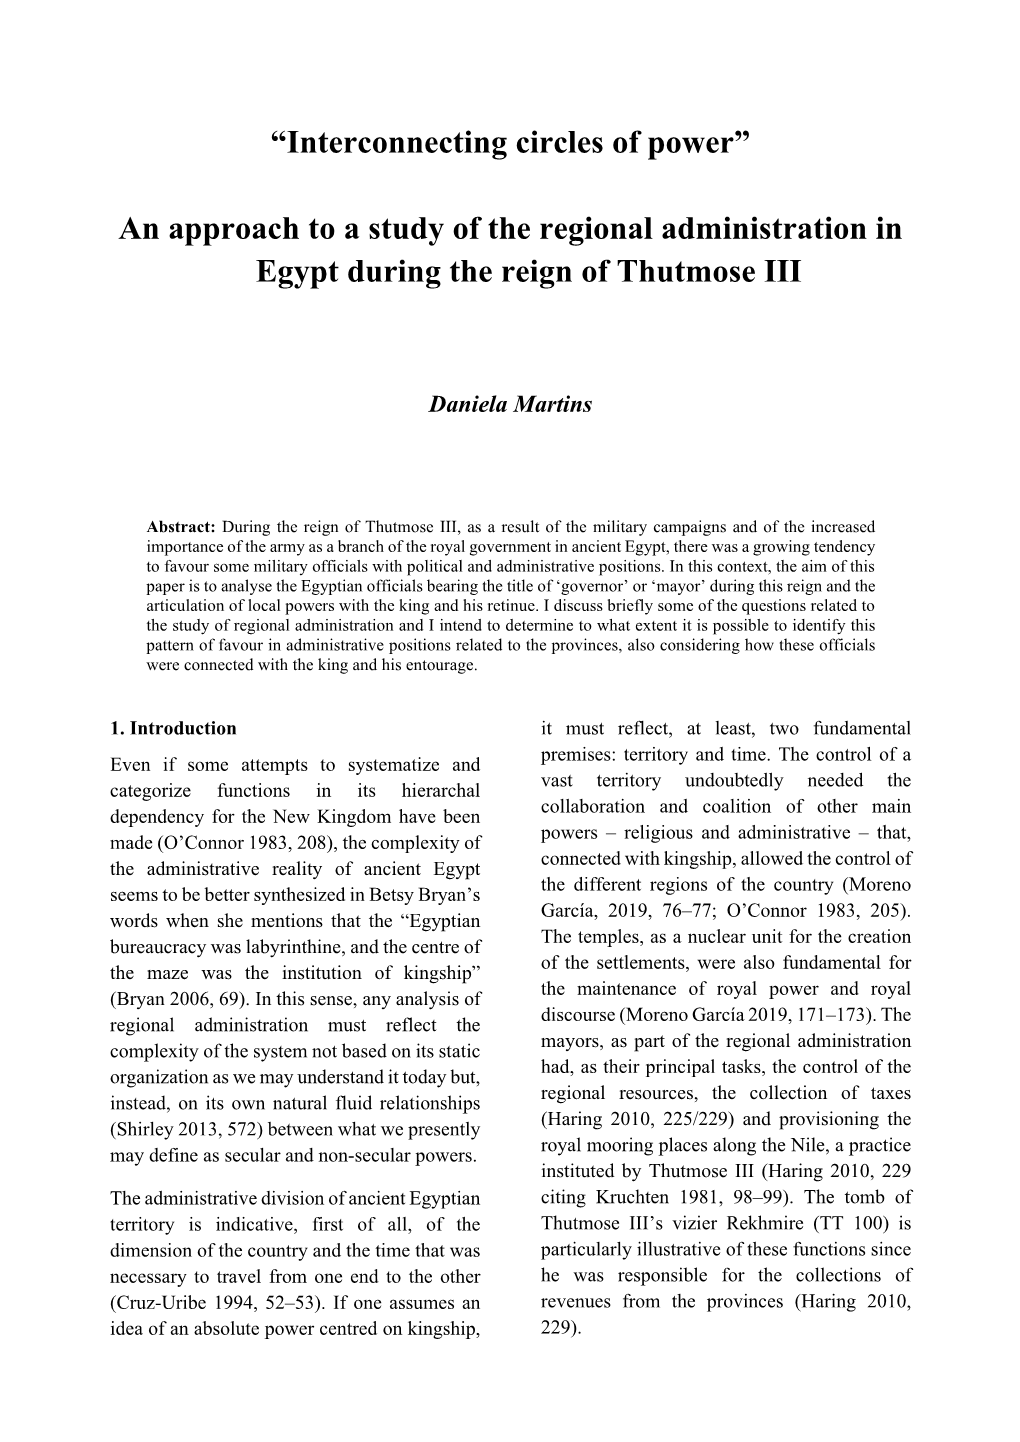 An Approach to a Study of the Regional Administration in Egypt During the Reign of Thutmose III